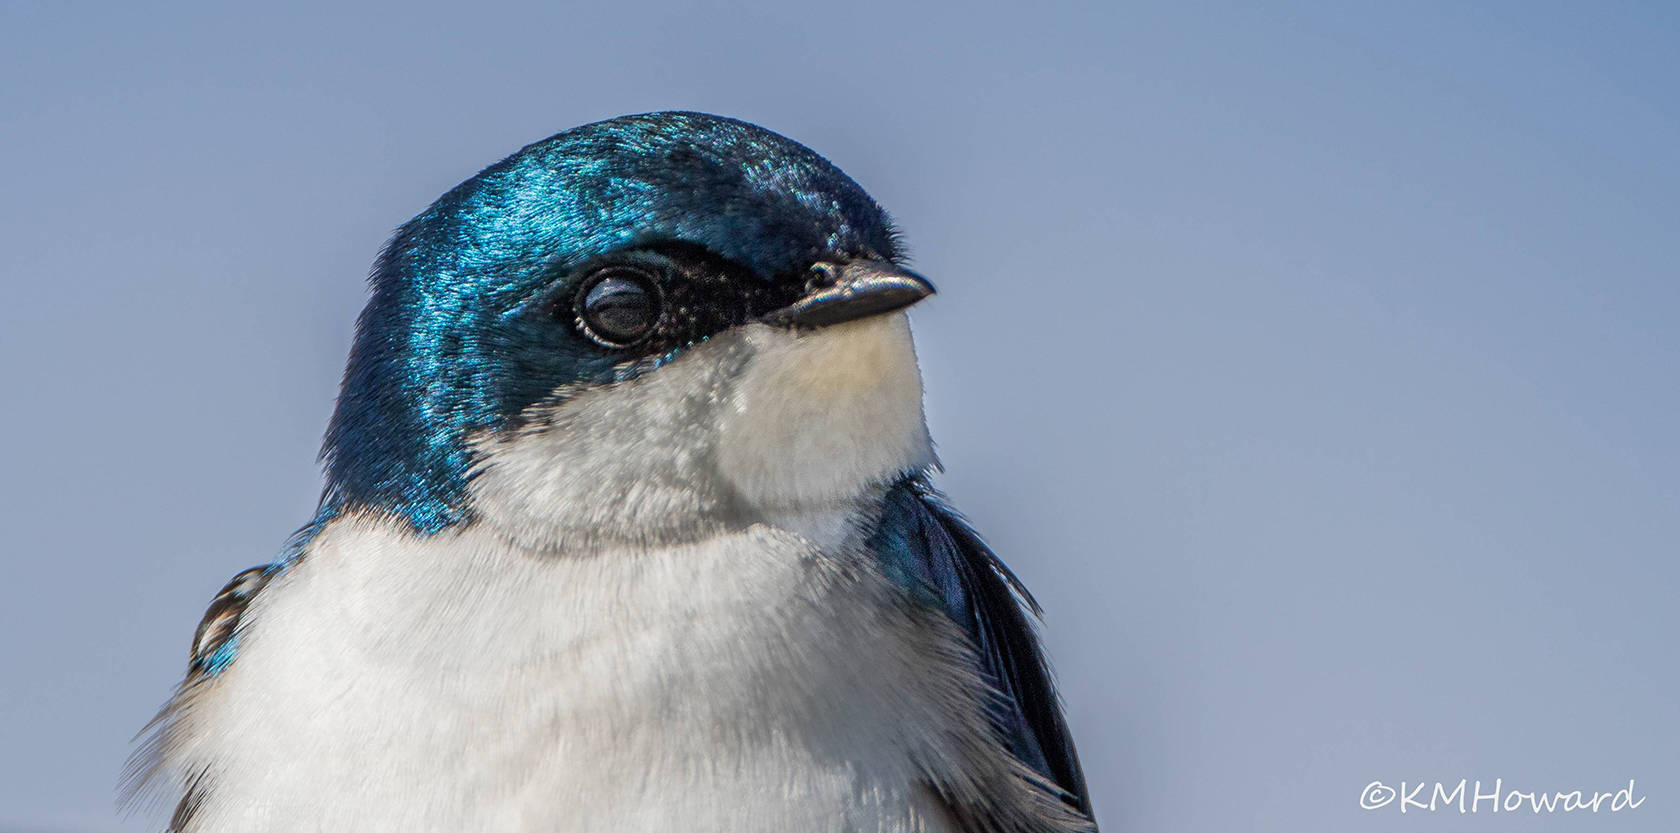 A tree swallow at the Mendenhall Wetlands. (Photo by Kerry Howard)